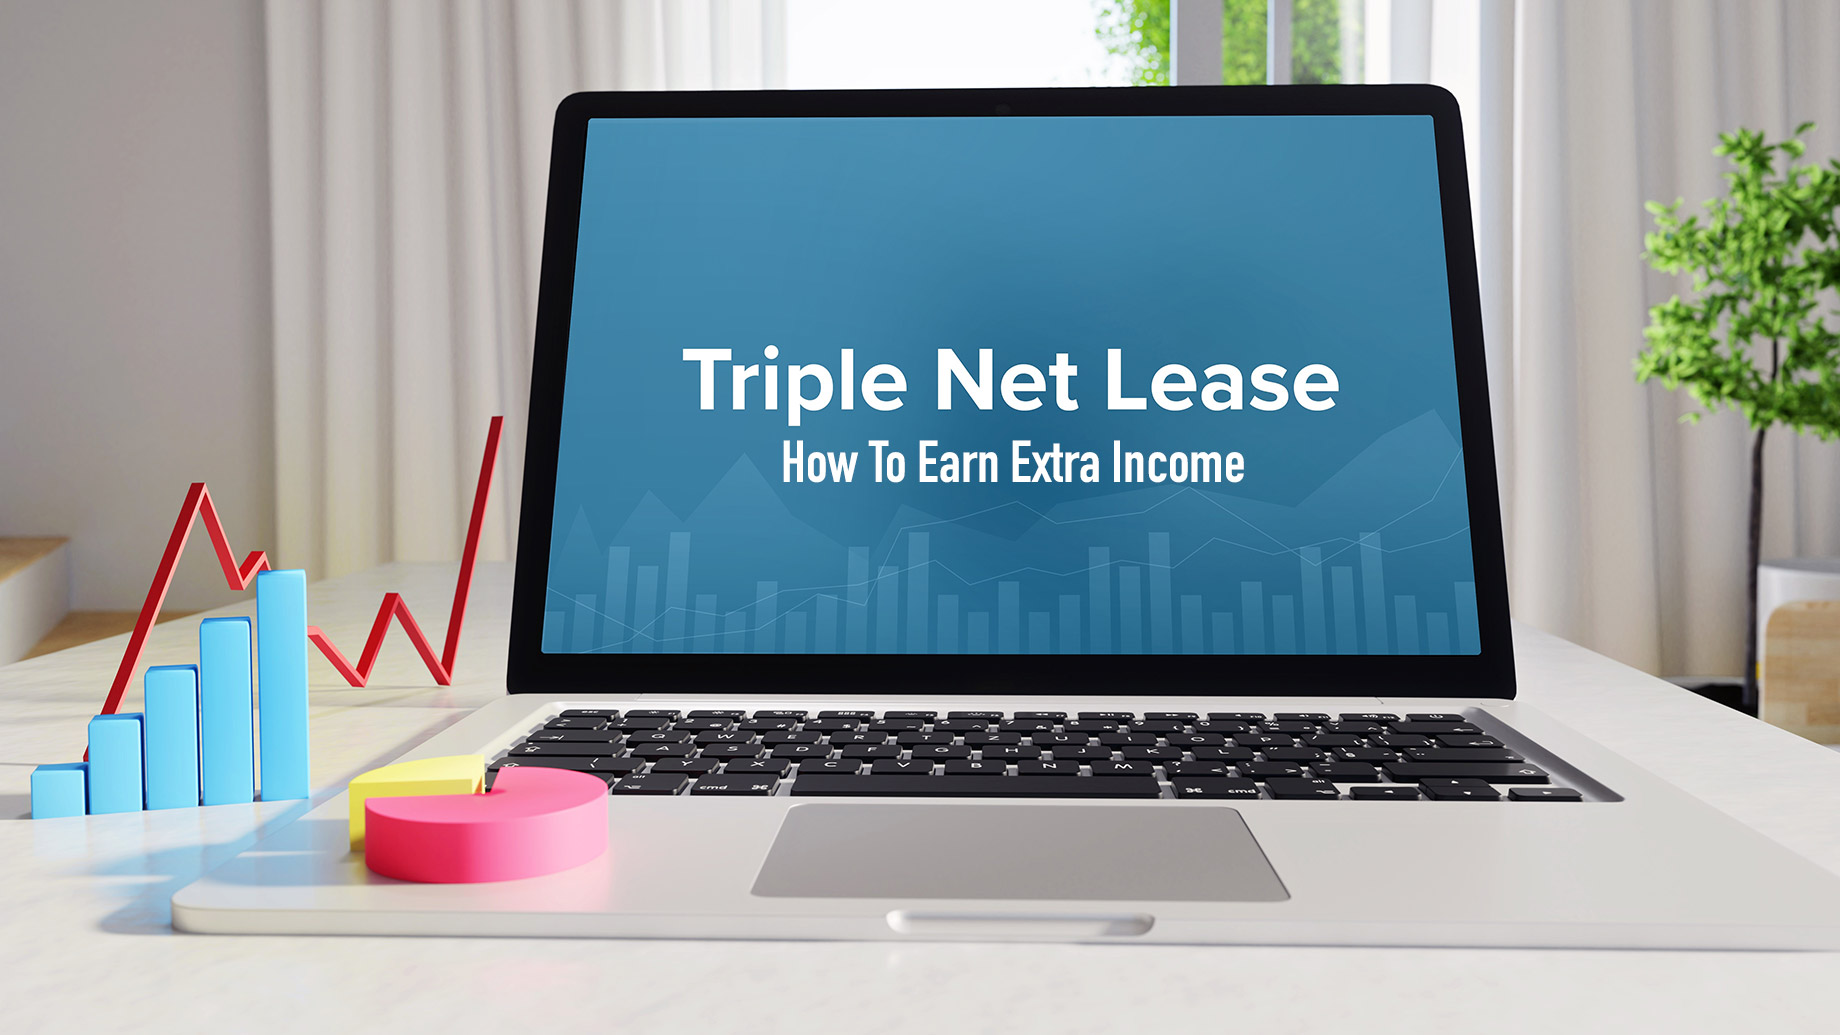 Triple Net Lease - How To Earn Extra Income